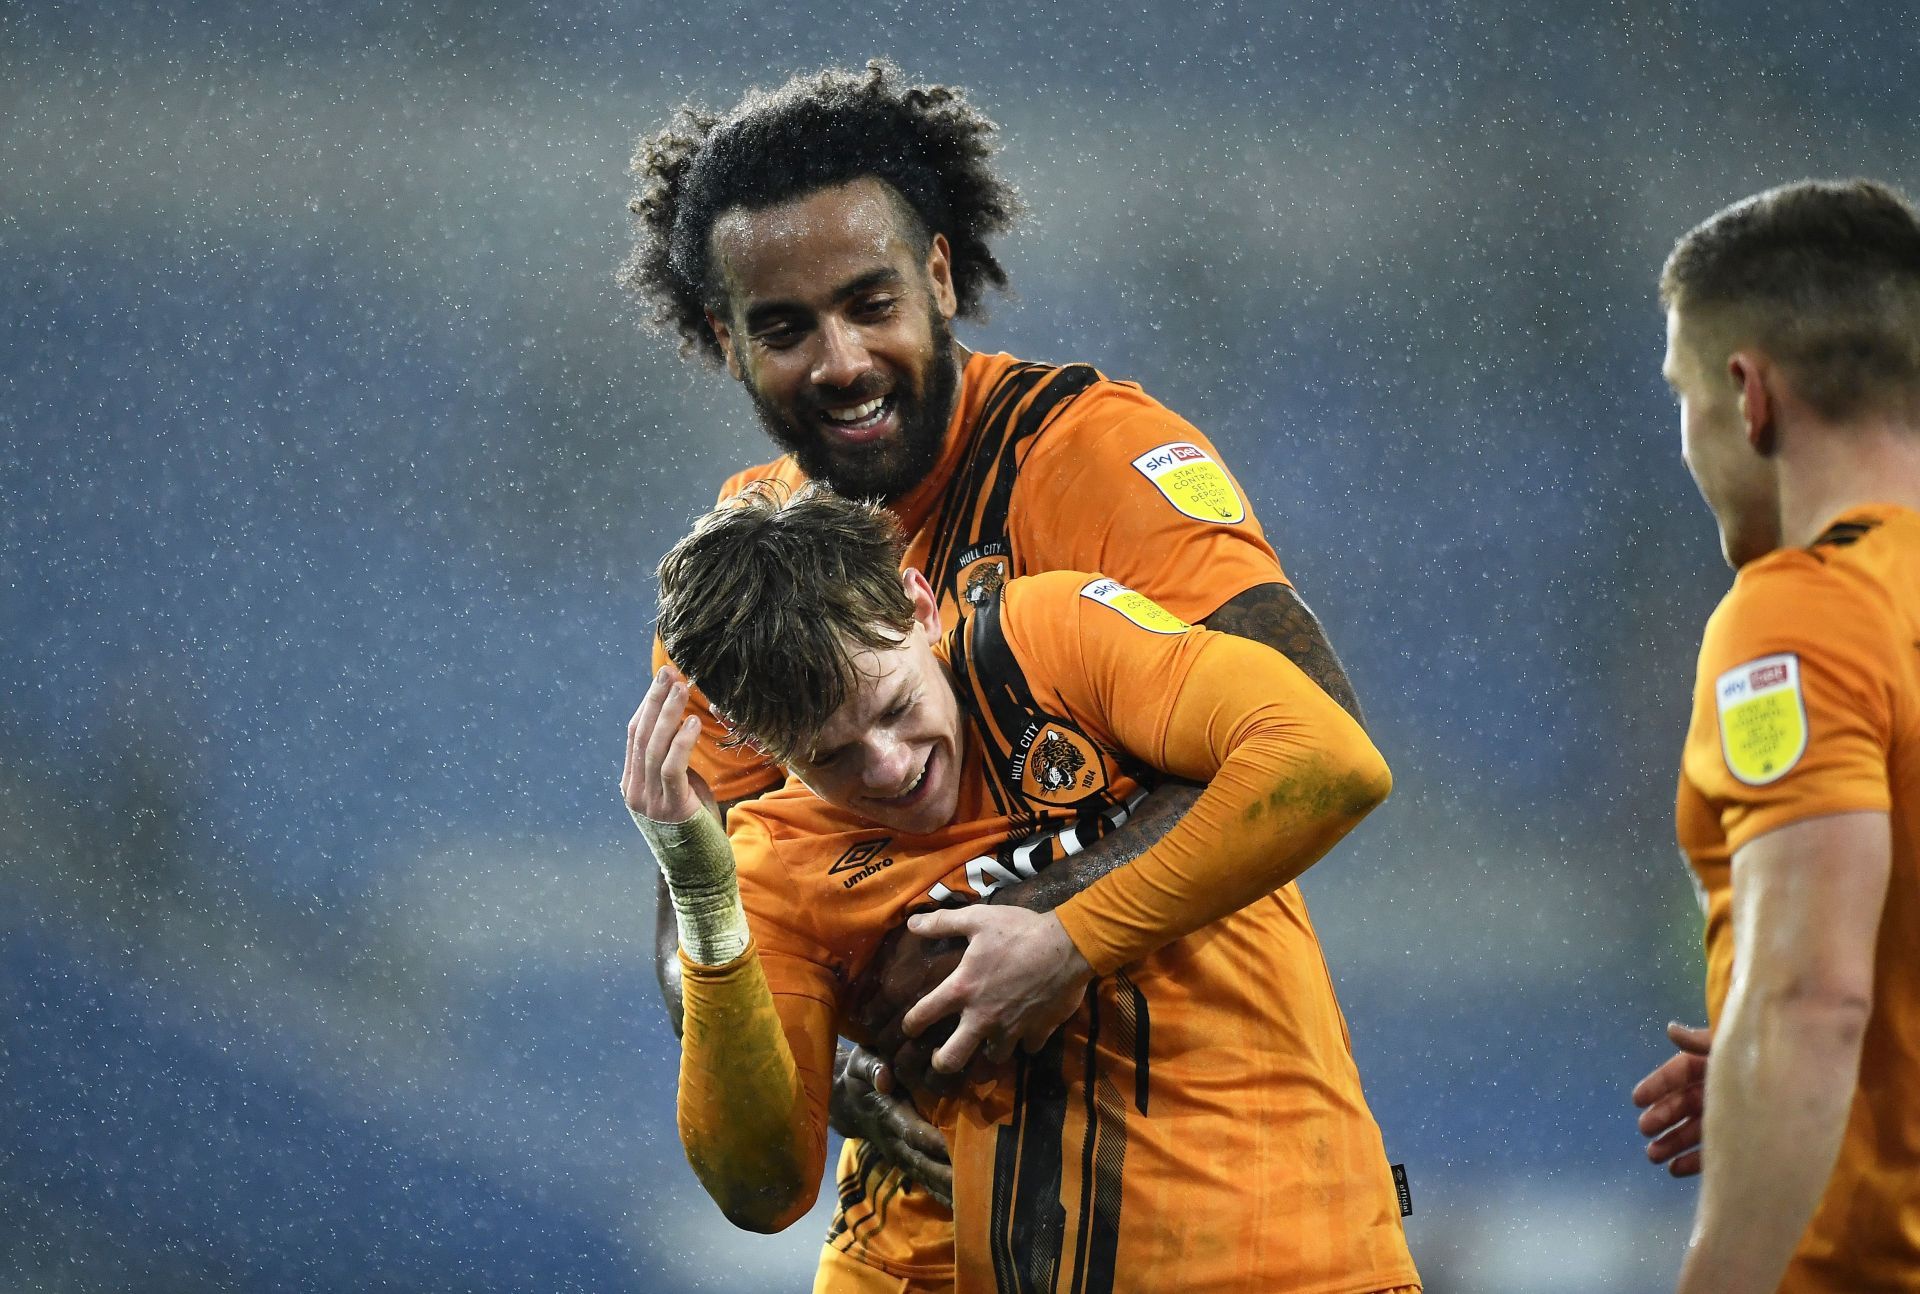 Hull City will host Nottingham Forest on Saturday - Sky Bet Championship